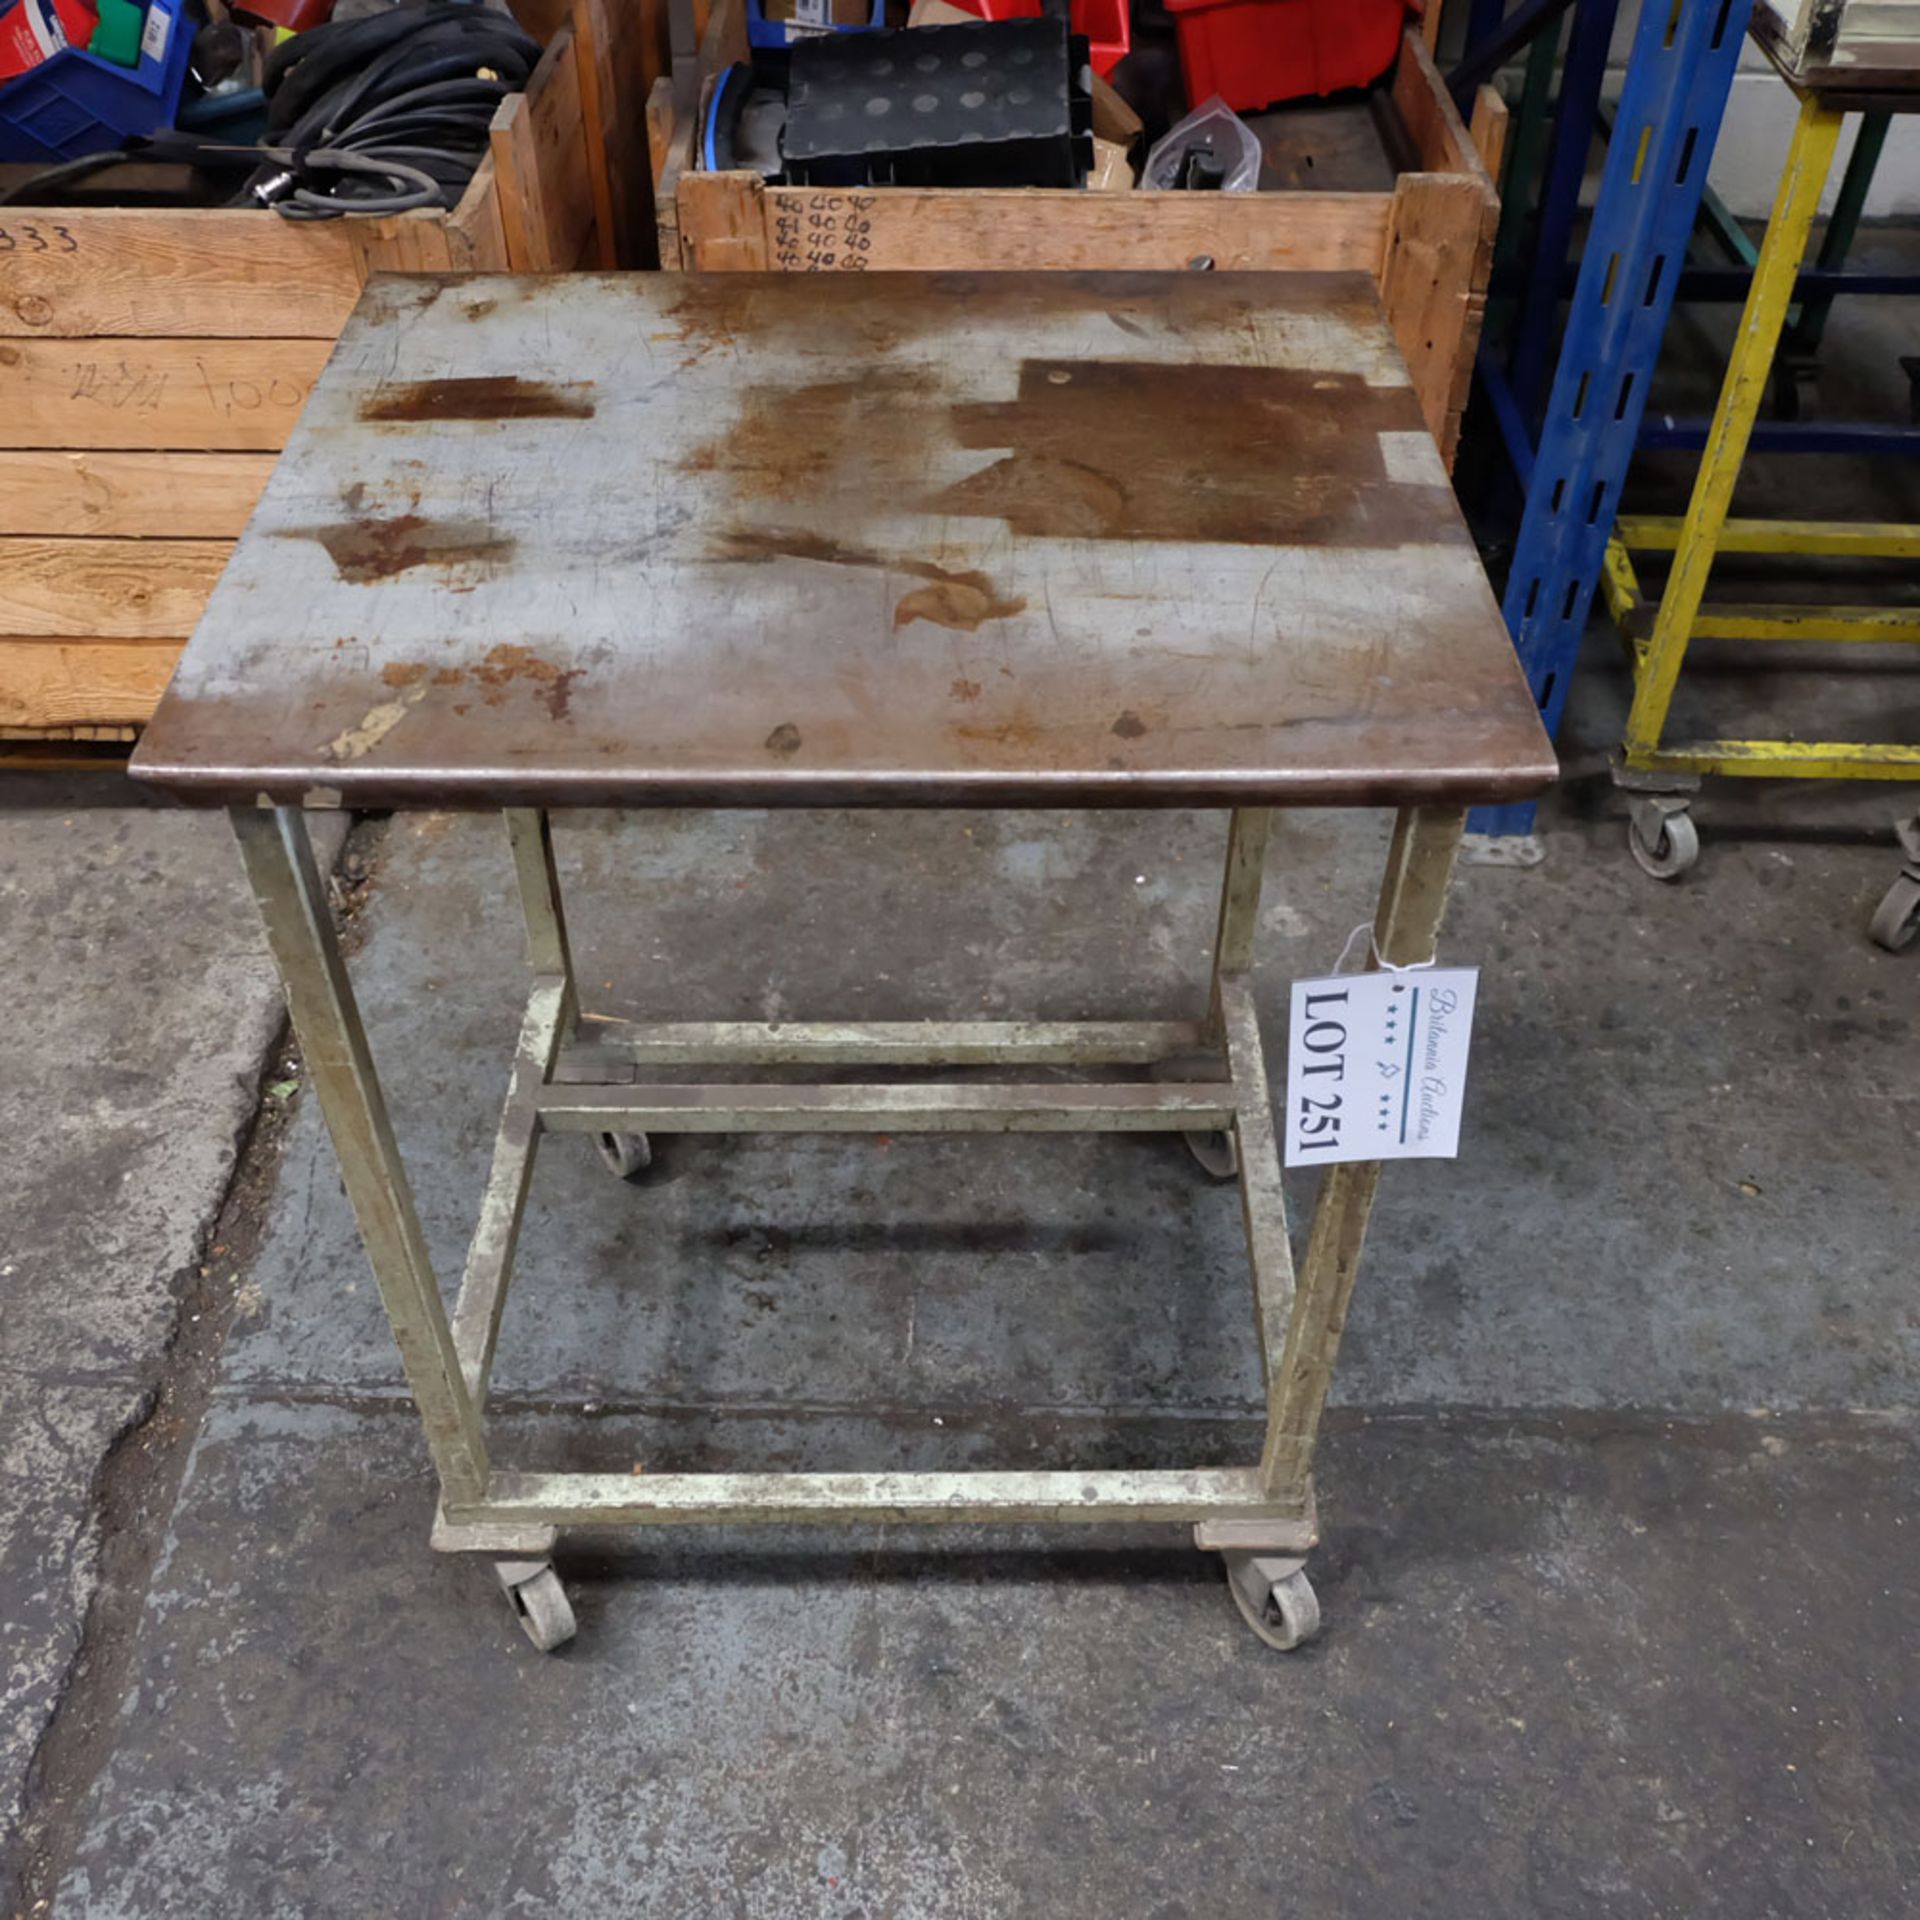 Mobile Steel Table on Castors. Approx Working Height 750mm. Approx Surface Size 610mm x 500mm.